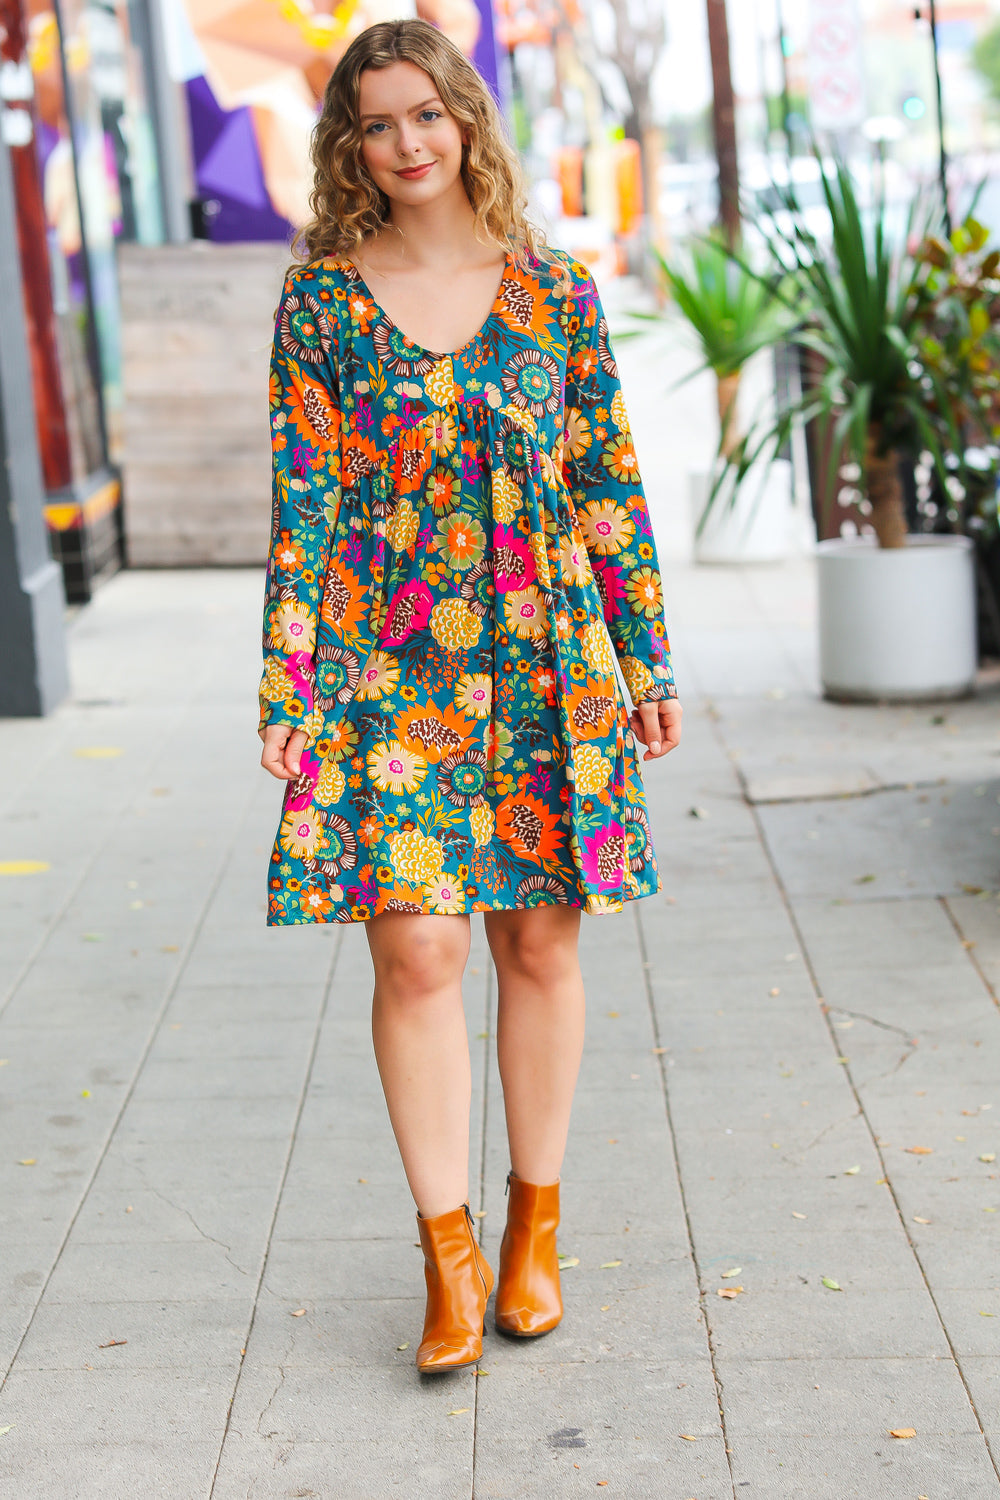 All About It Teal Vibrant Floral Pocketed Dress - Sybaritic Bags & Clothing